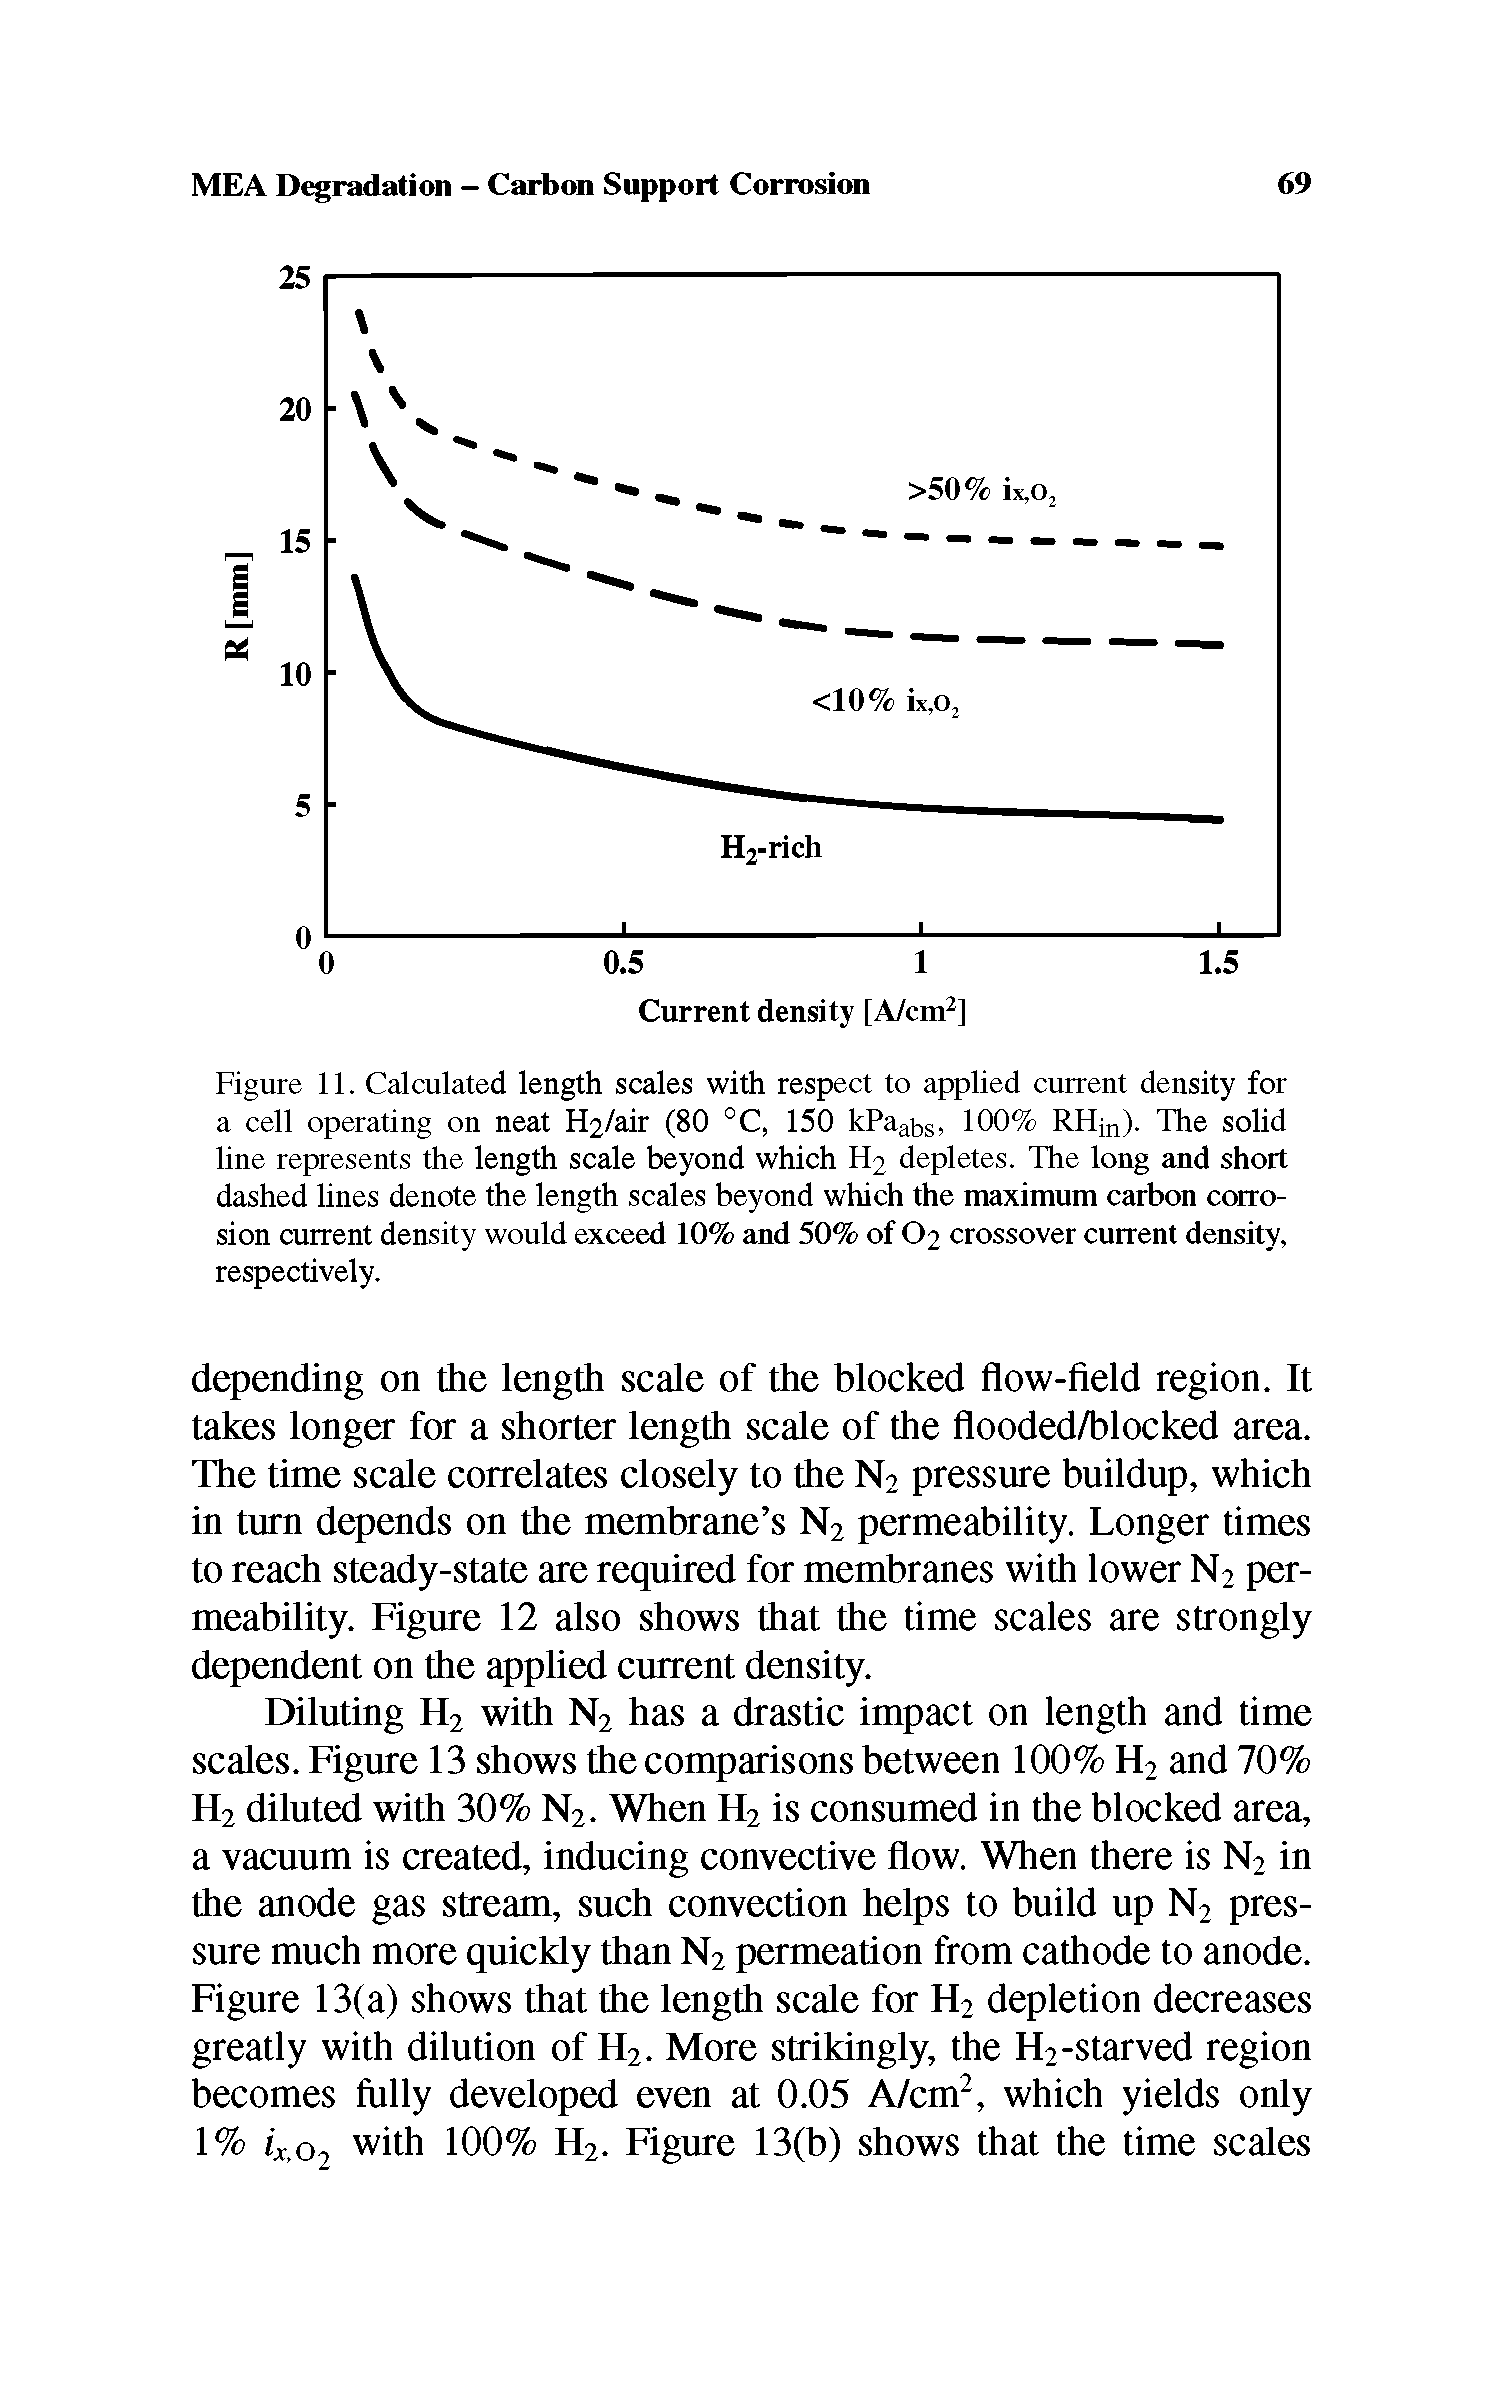 Figure 11. Calculated length scales with respect to applied current density for a cell operating on neat H2/air (80 °C, 150 kPaabs, 100% RHin). The solid line represents the length scale beyond which Fl2 depletes. The long and short dashed lines denote the length scales beyond which the maximum carbon corrosion current density would exceed 10% and 50% of O2 crossover current density, respectively.